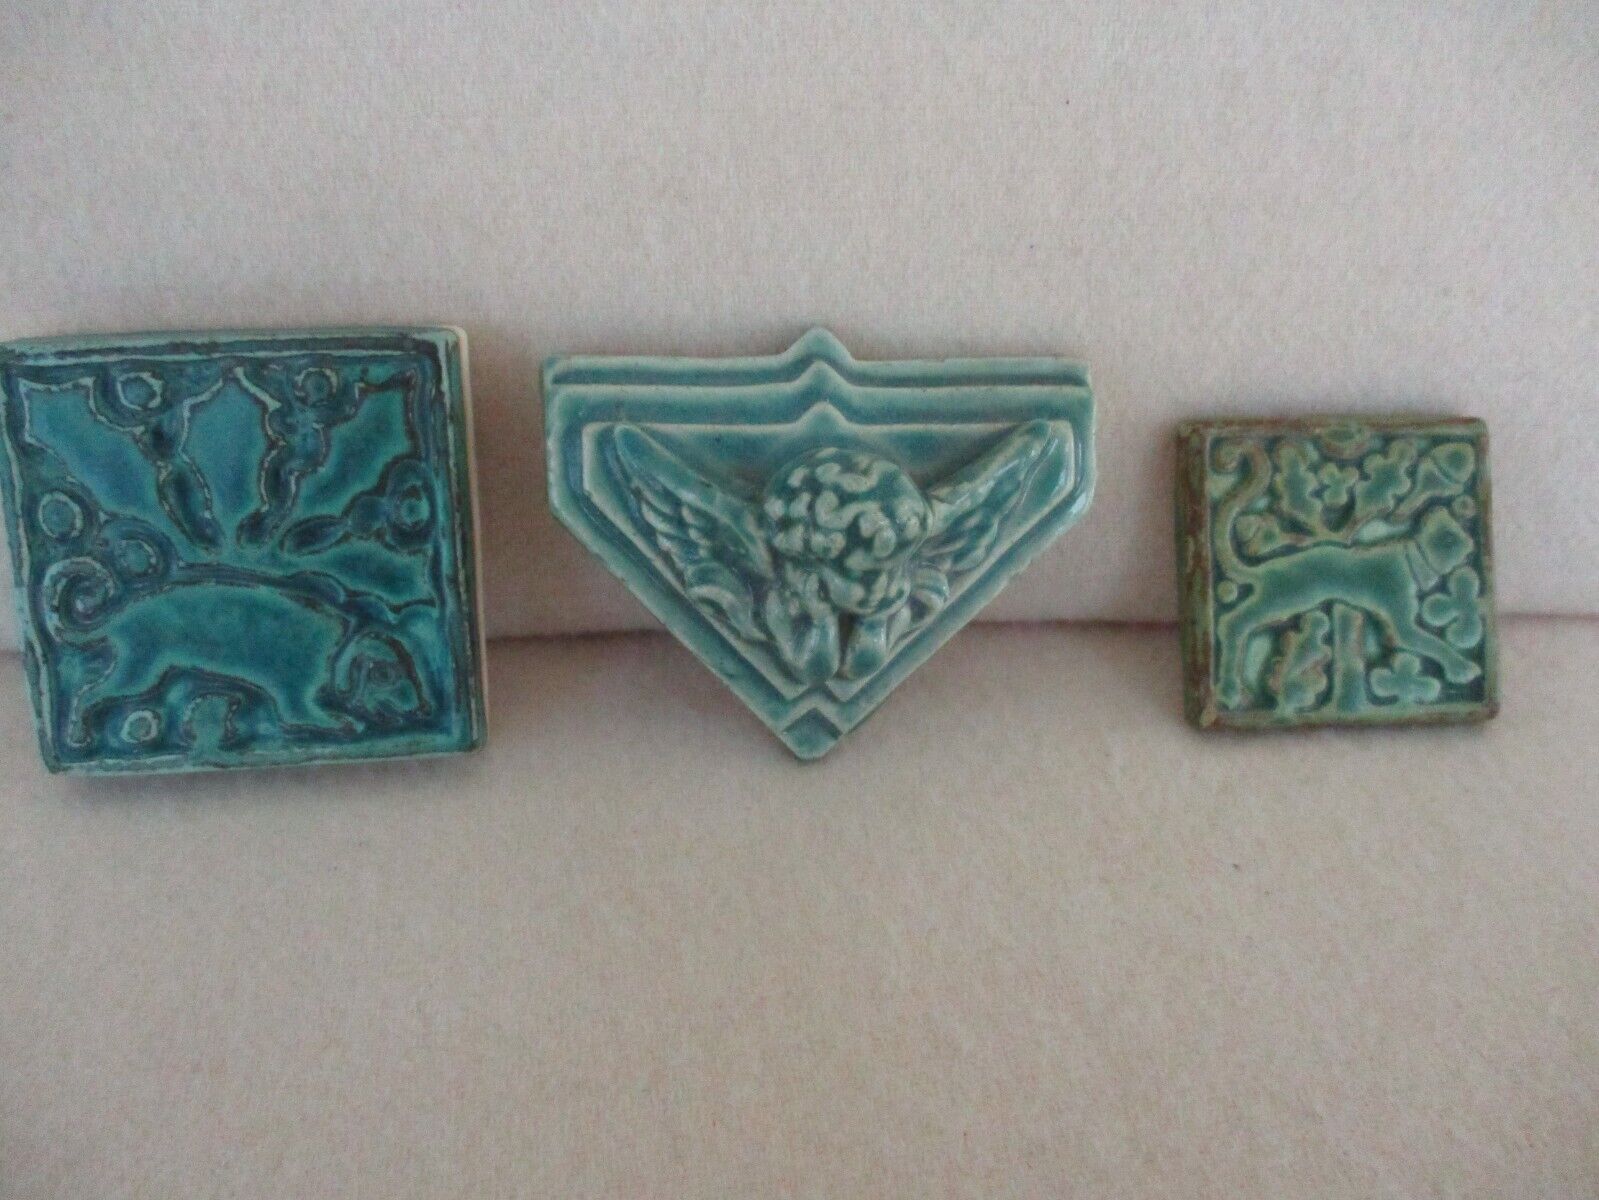 Lot of 3 green tiles, 1 old, all signed, Motawi and Tyge, 1 angel